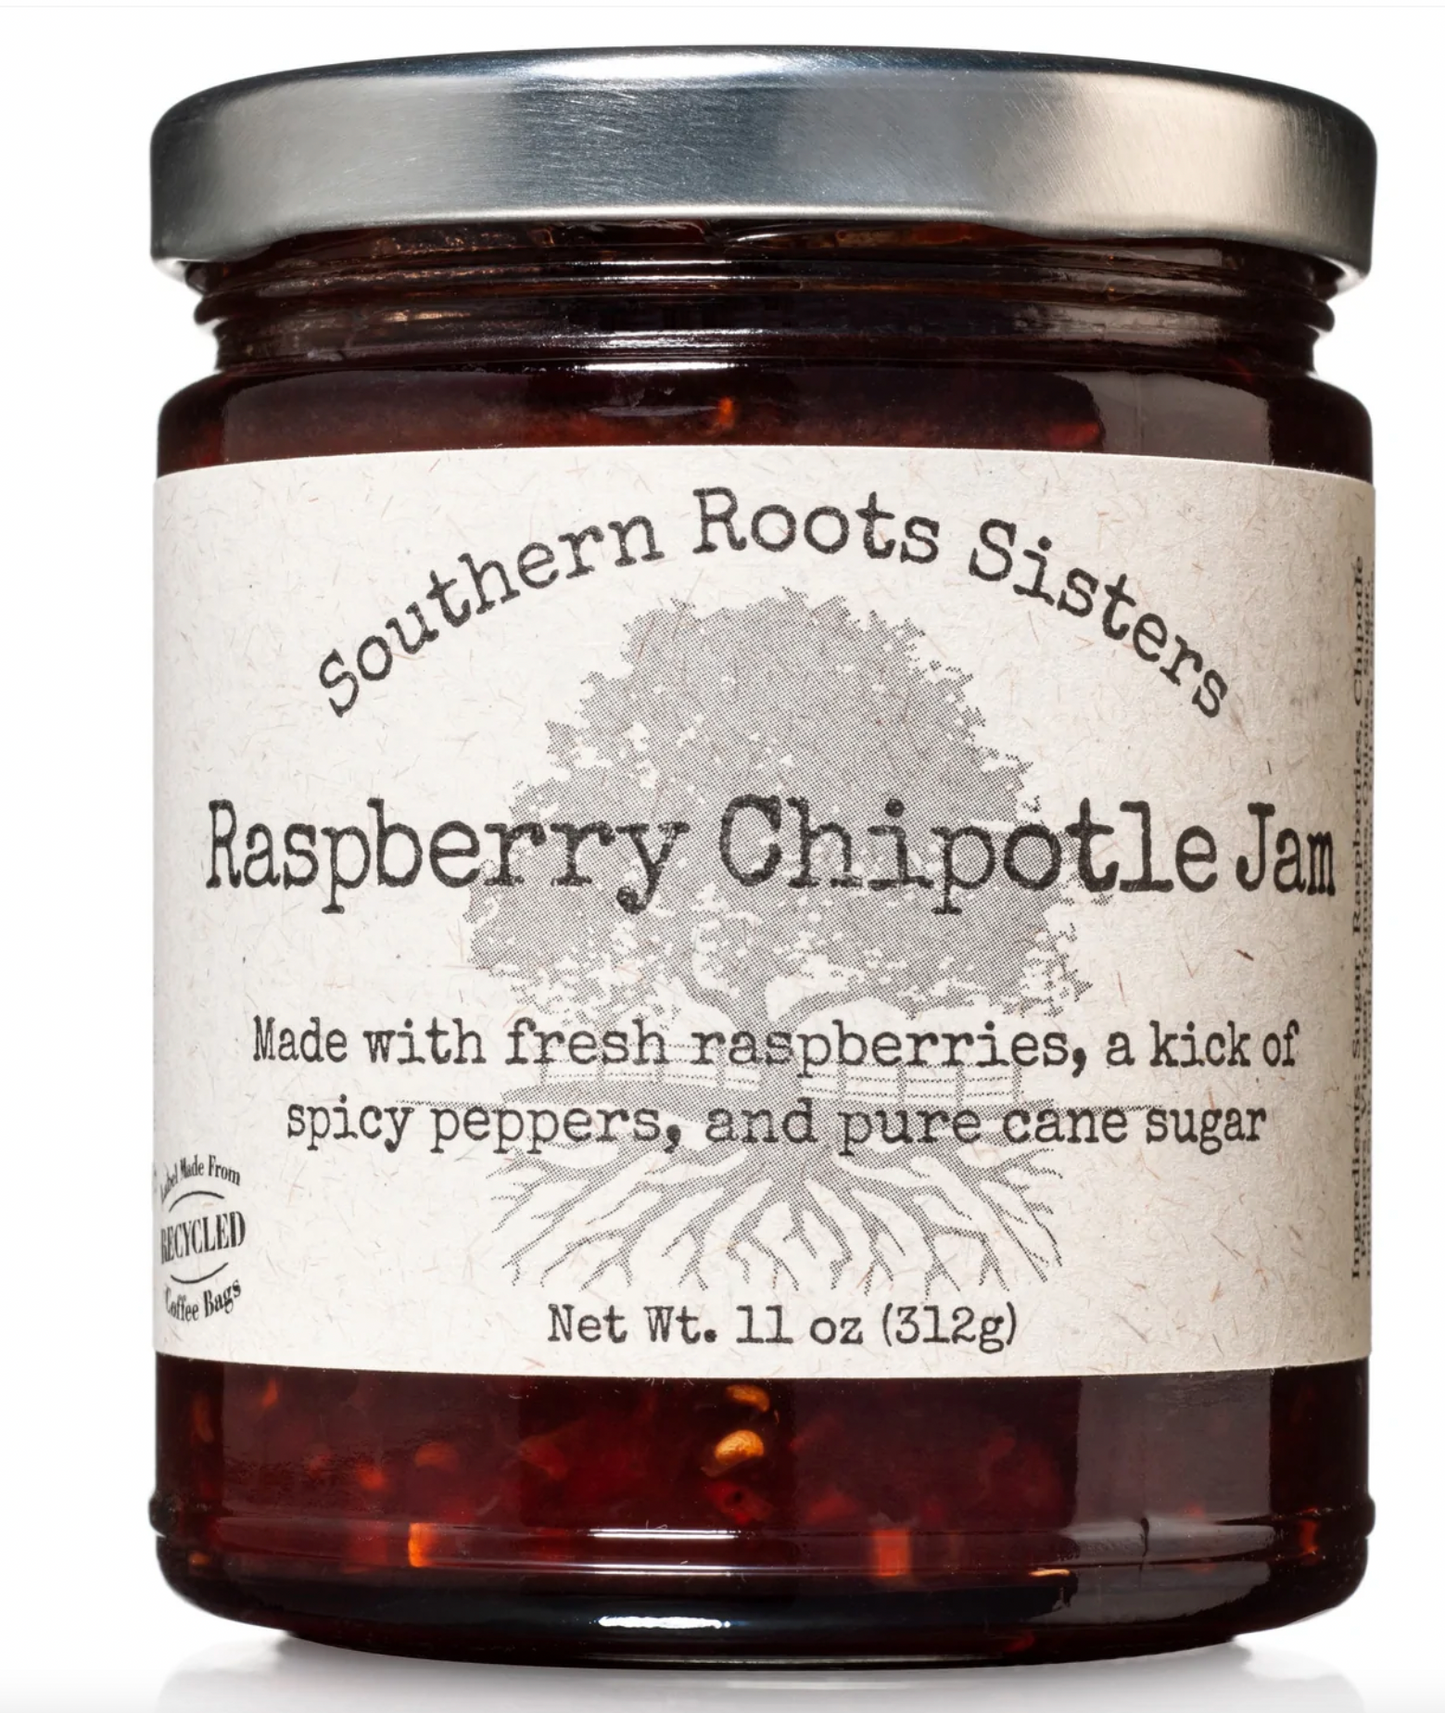 SOUTHERN ROOTS SISTERS GOURMET JAMS